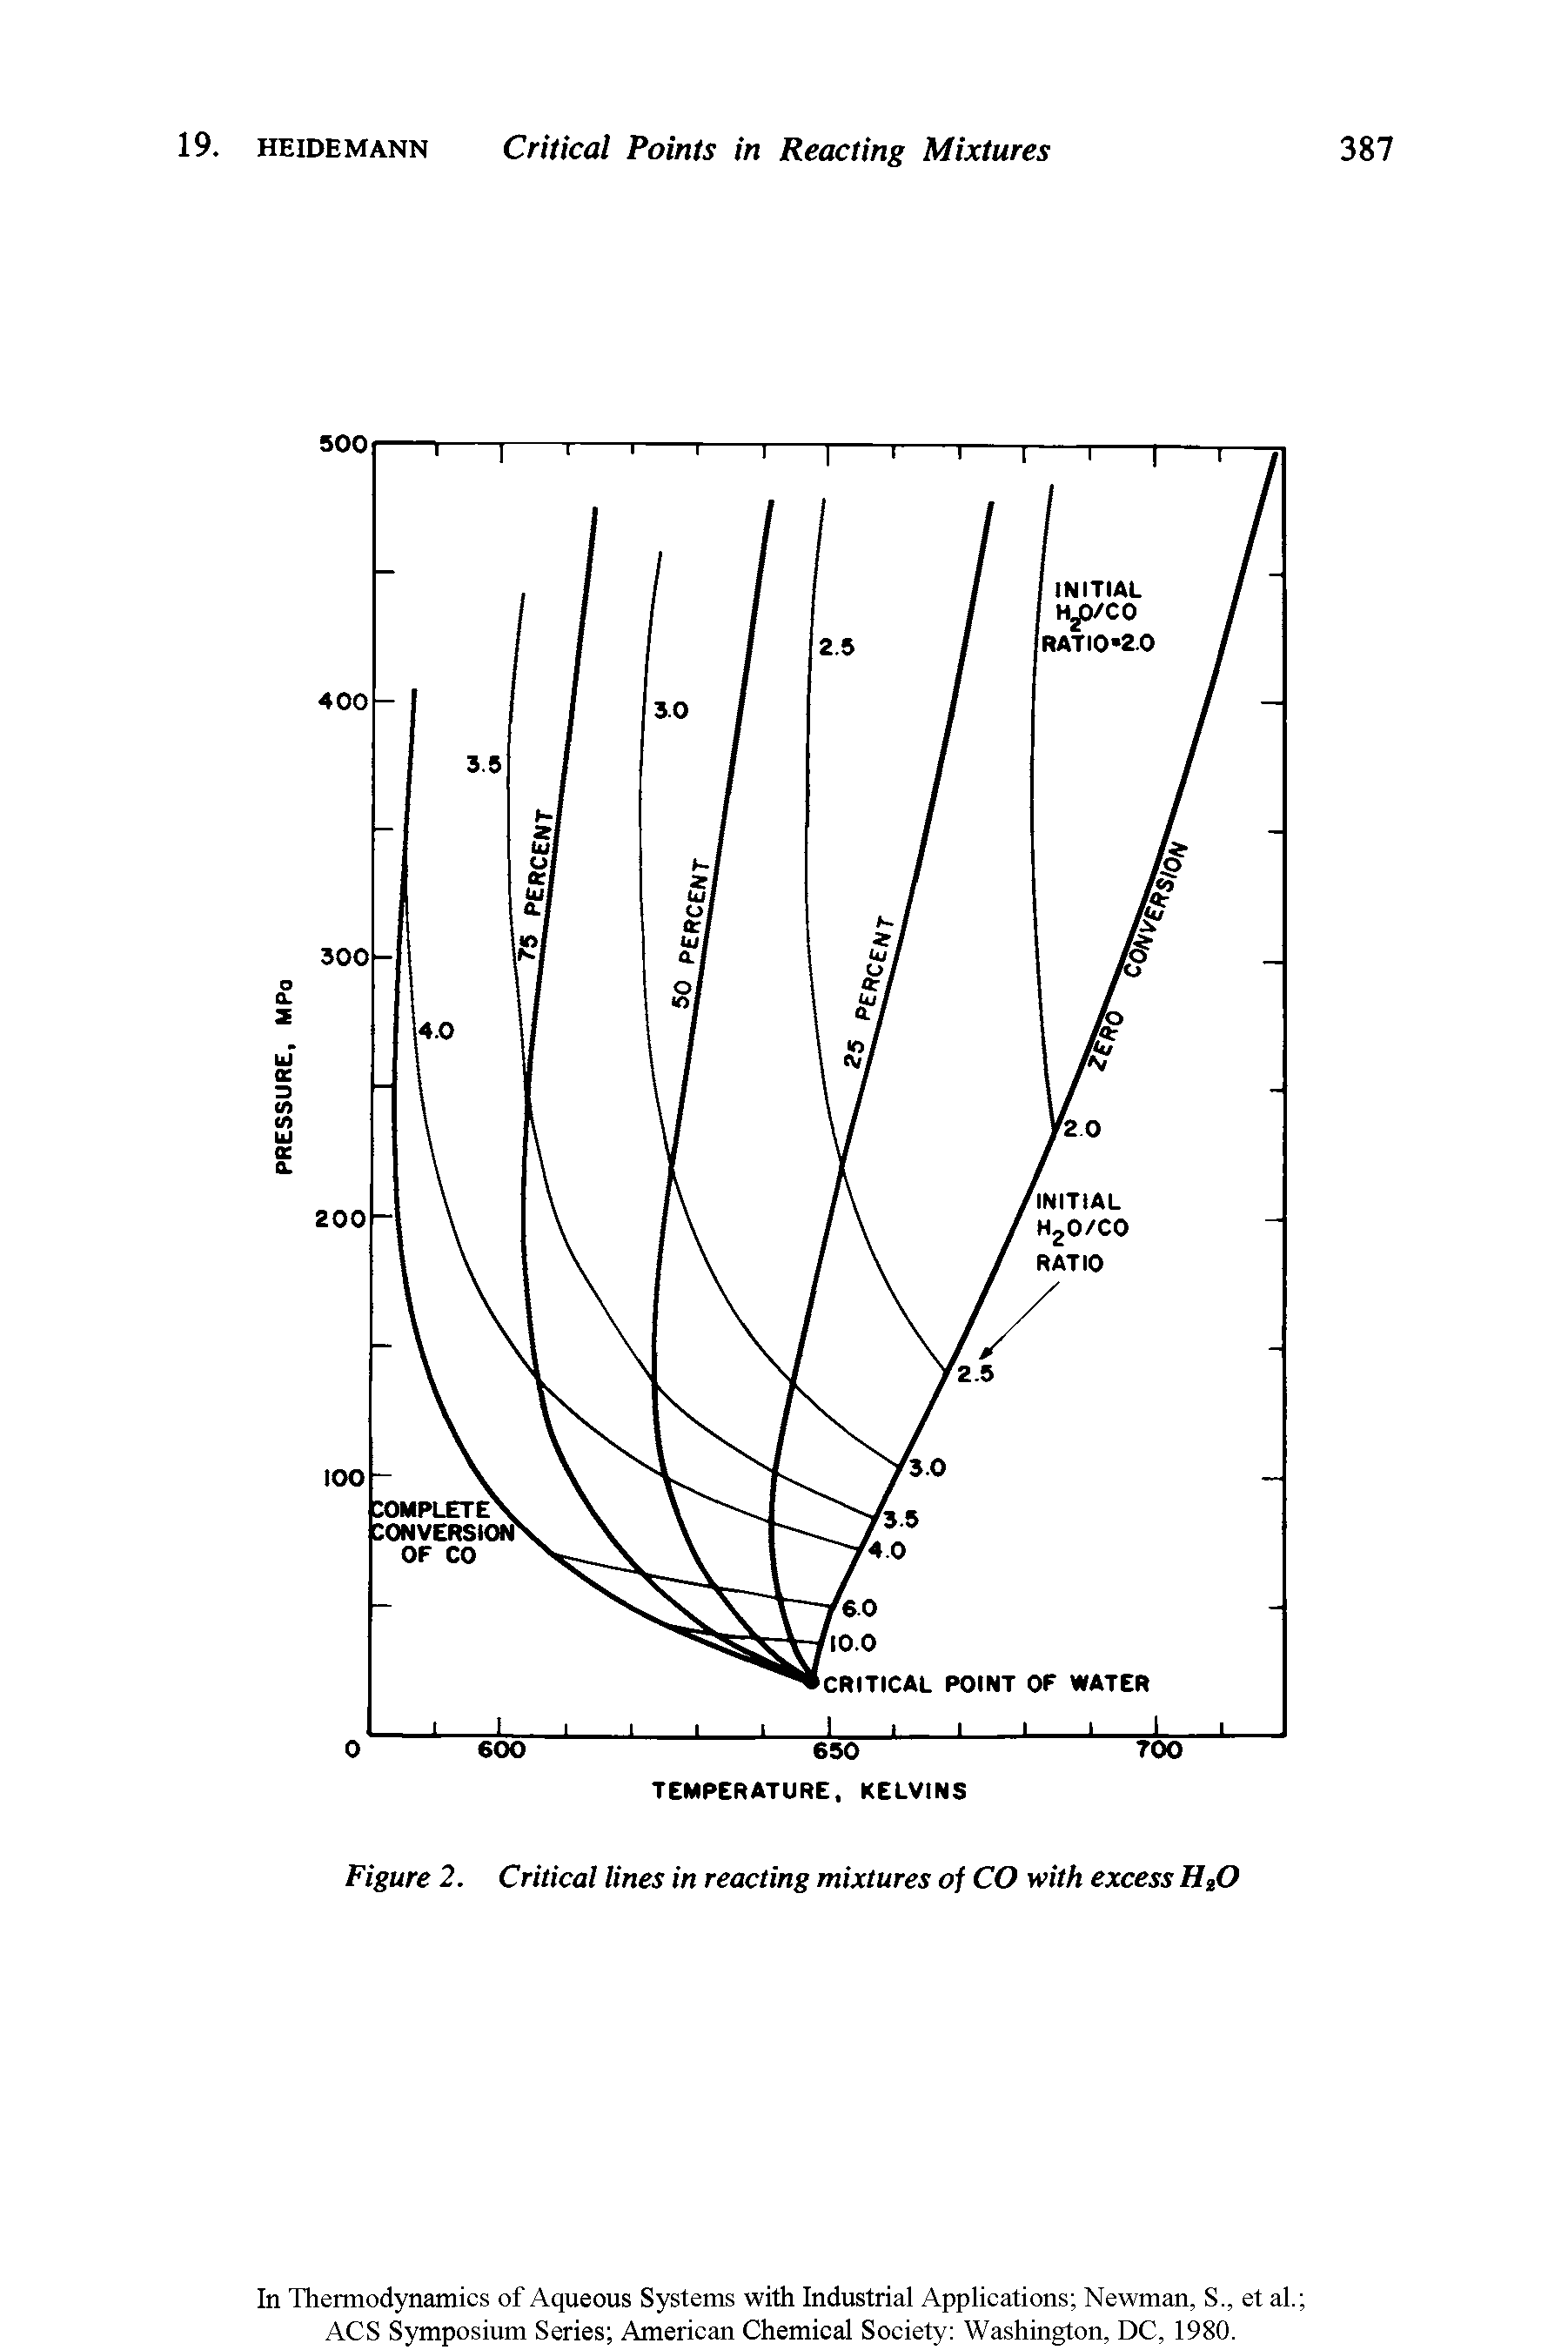 Figure 2. Critical lines in reacting mixtures of CO with excess HtO...